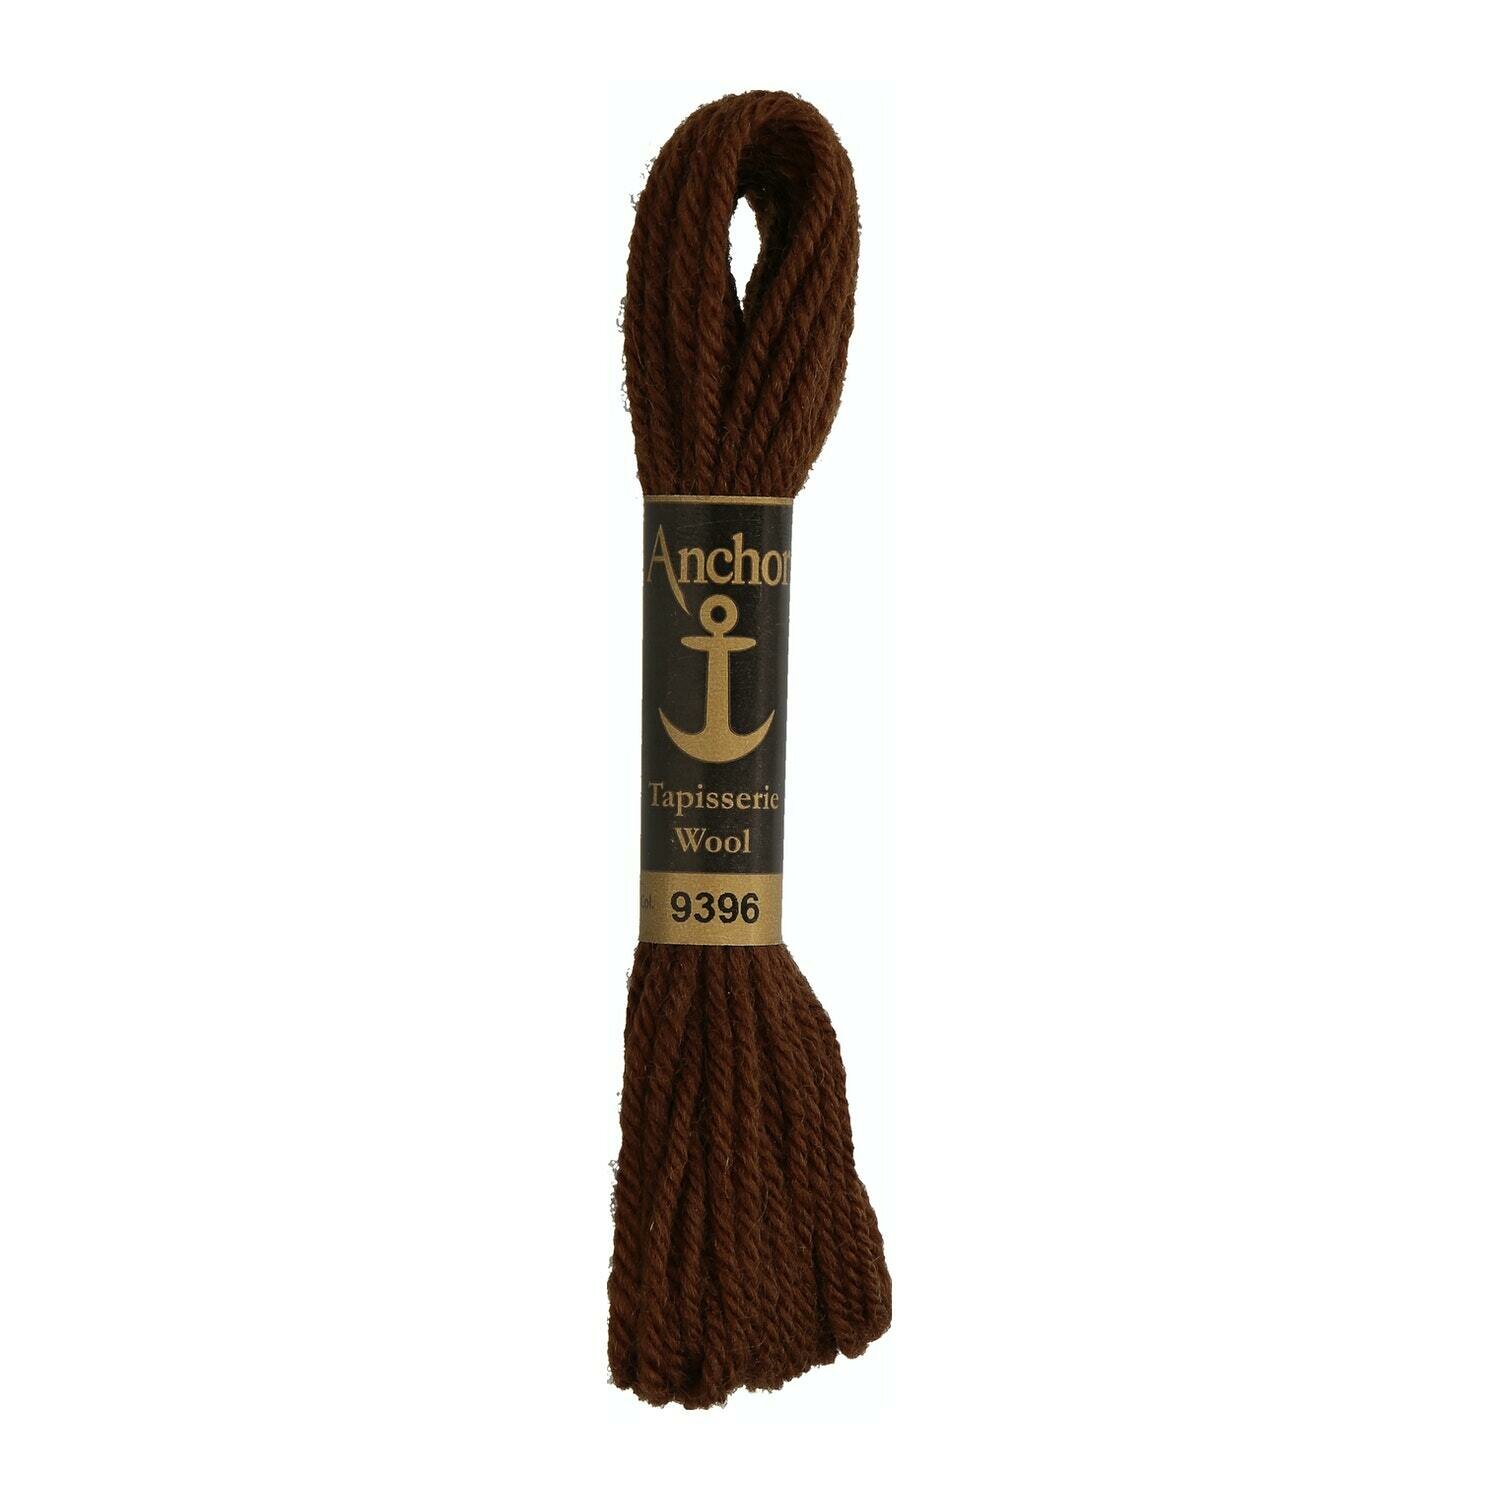 Anchor Tapisserie Wool # 09396